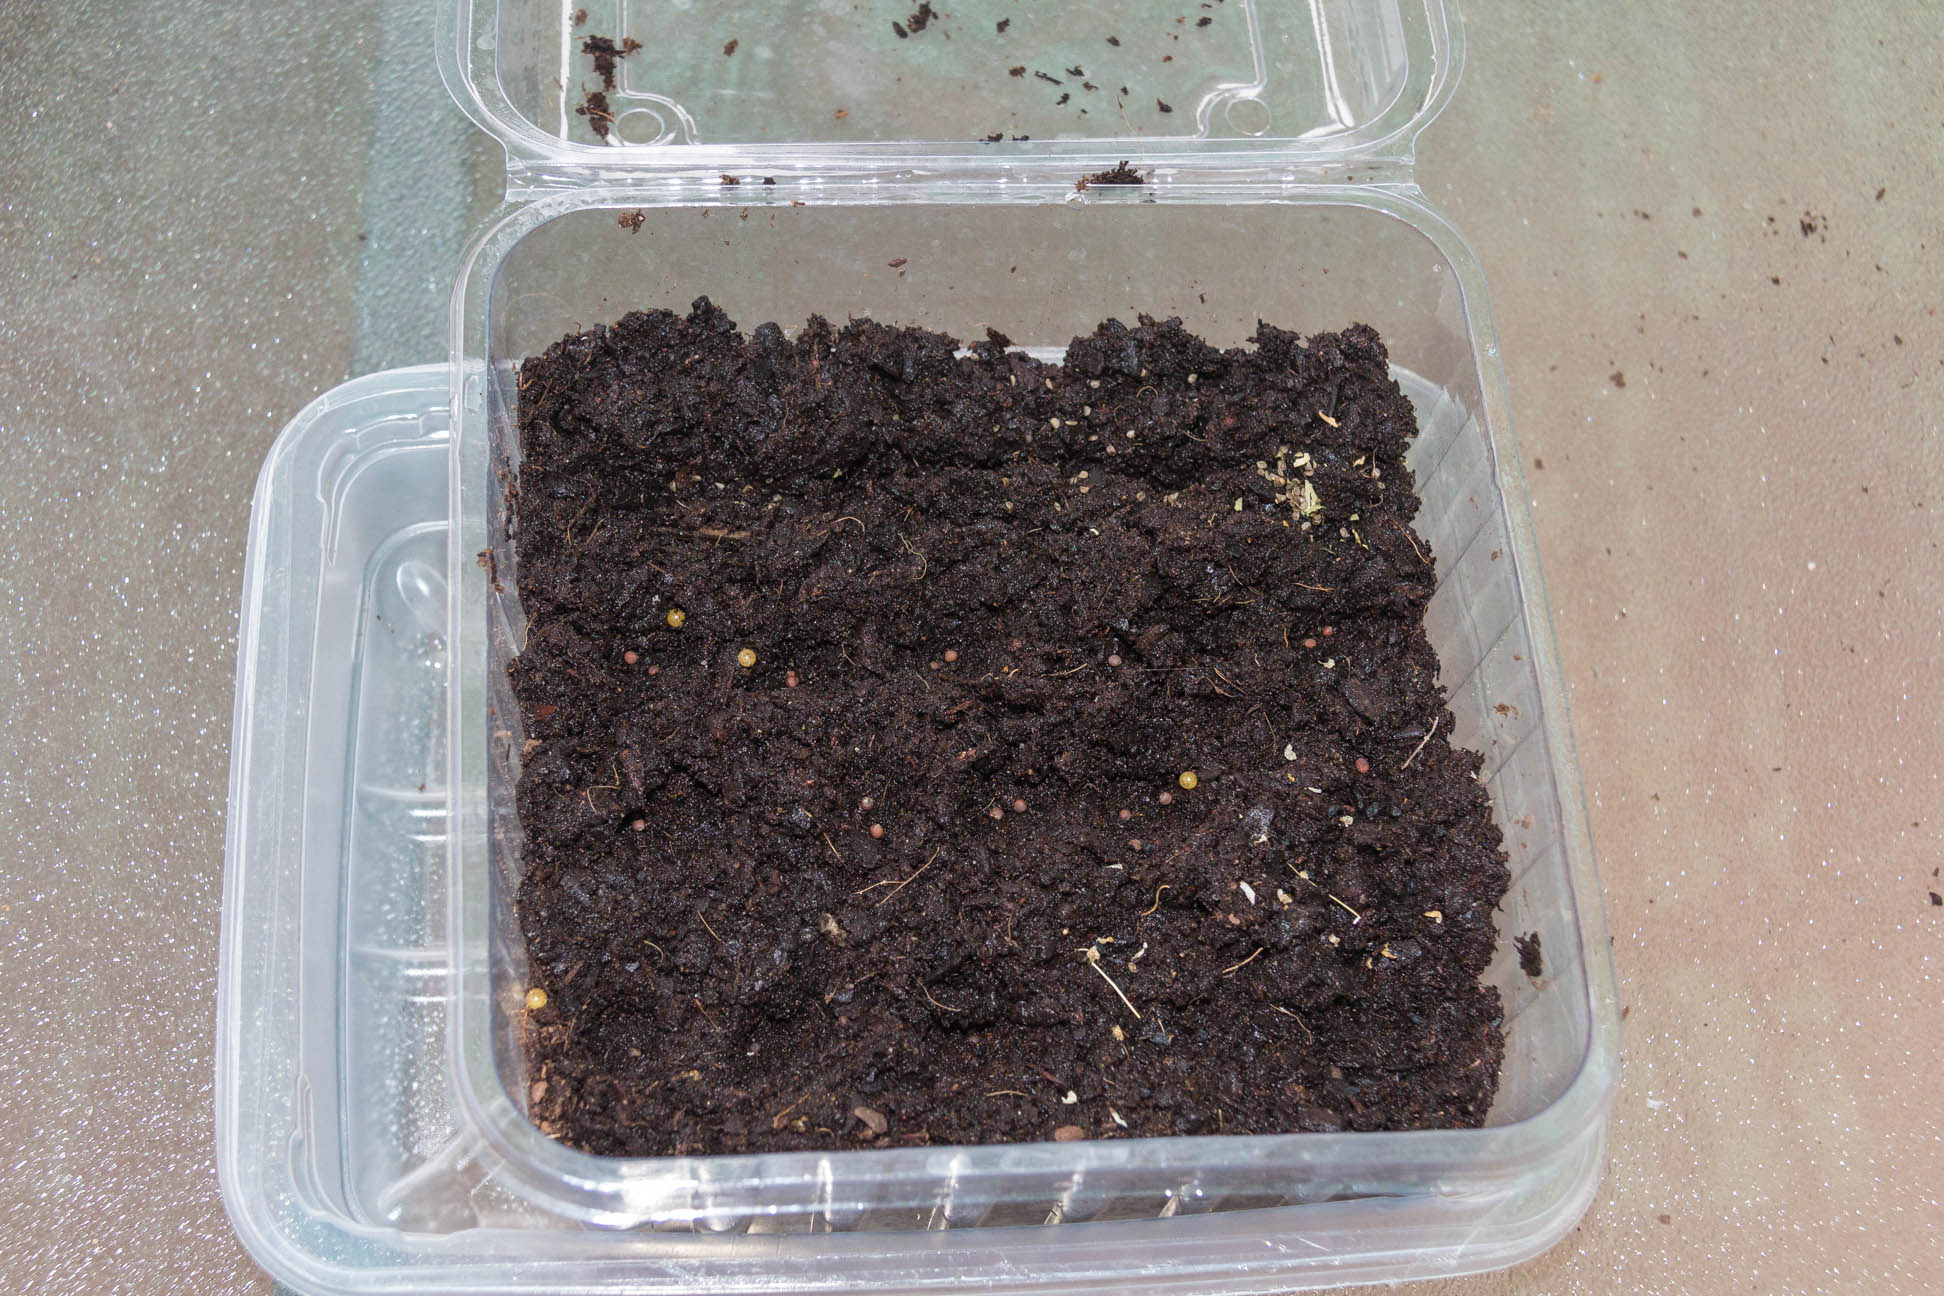 24/04/15 Day 1 covered the seeds over with soil